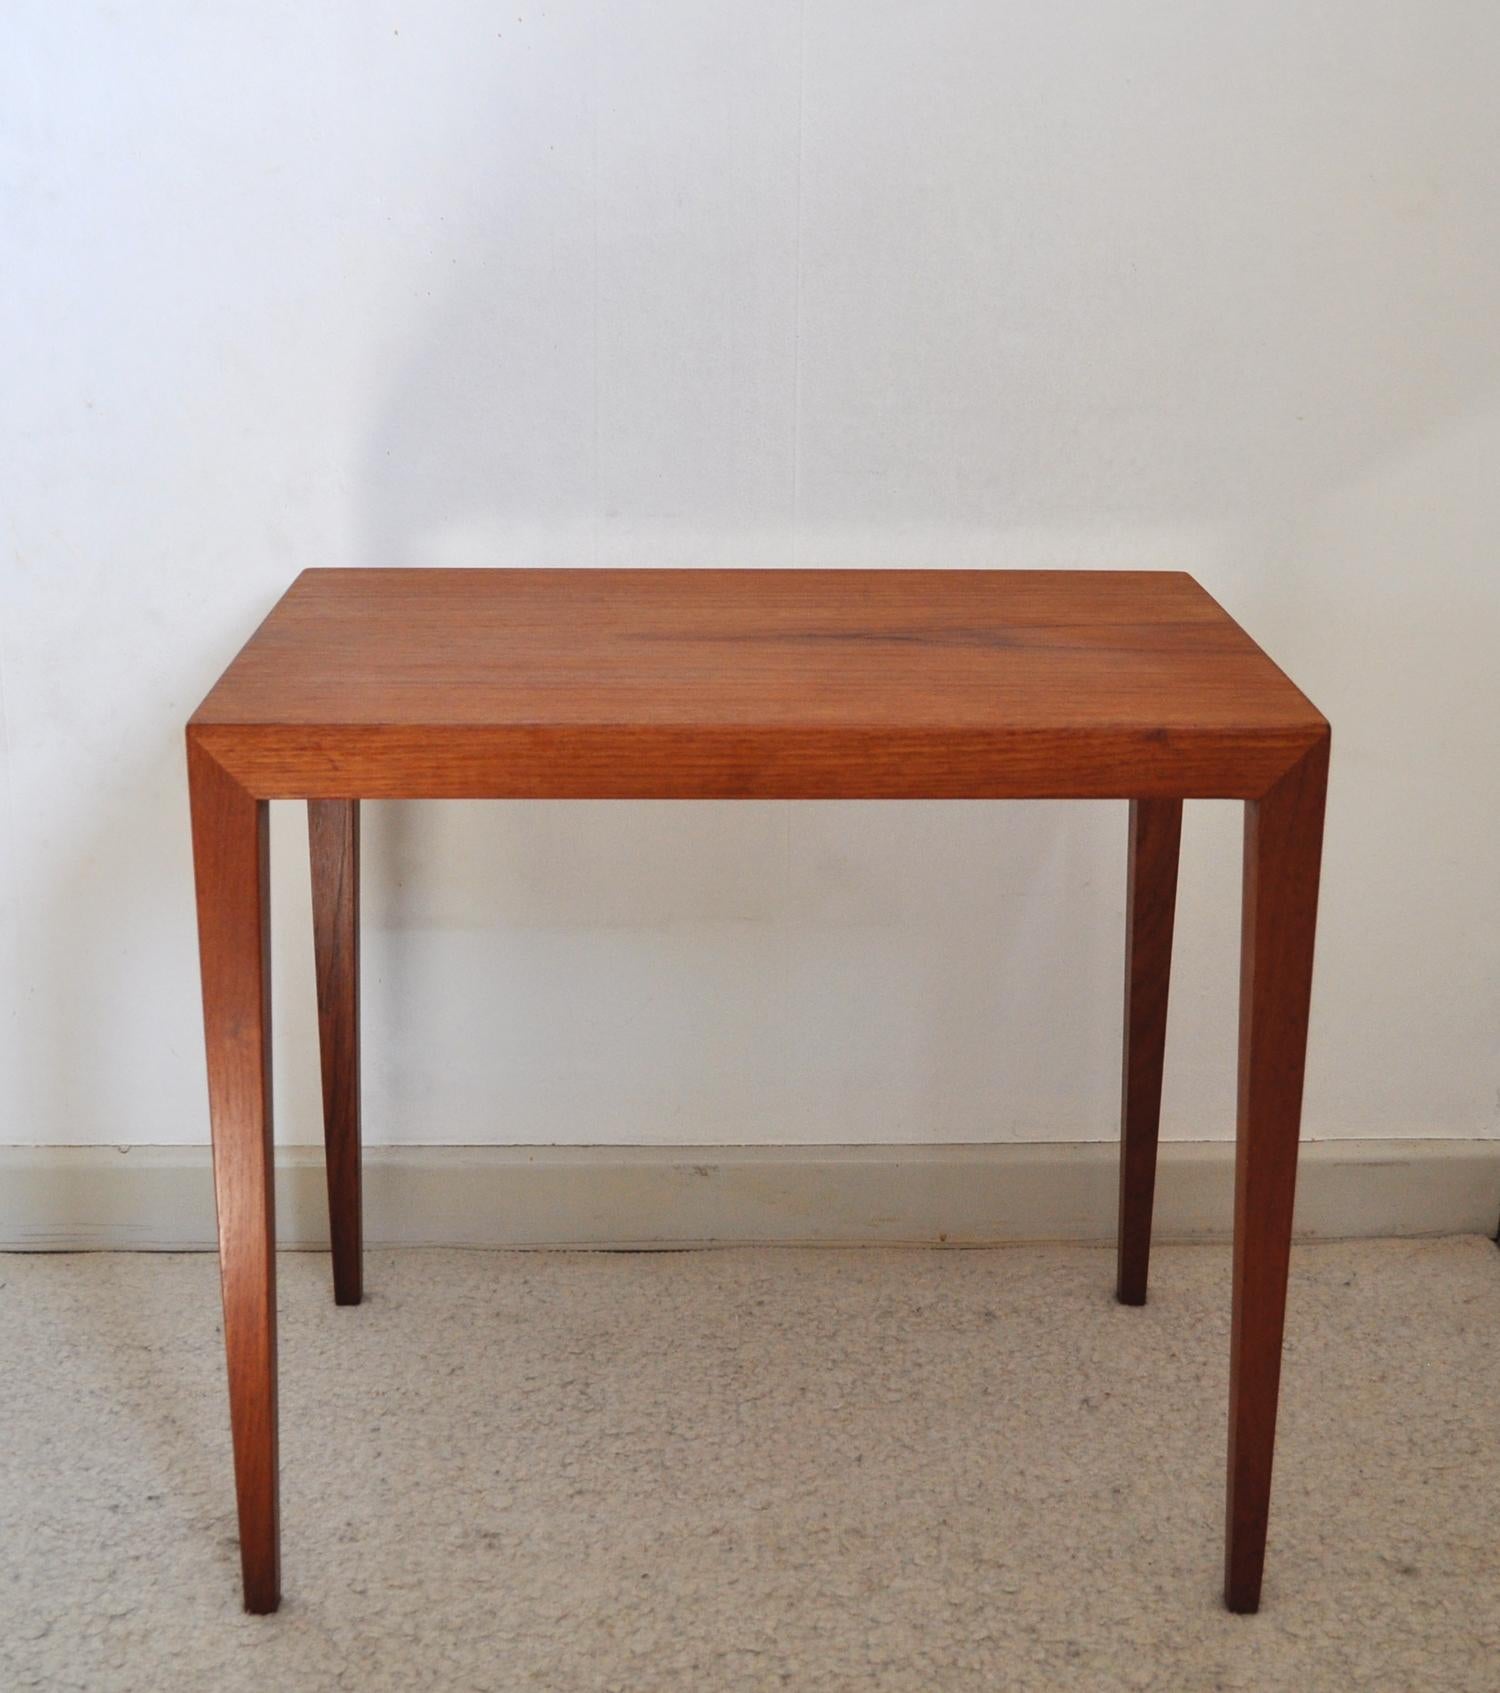 Beautiful teak side table. Designed by Severin Hansen Jr. in the 1960s and manufactured by Haslev Møbelsnedkeri in the same period. 

Good vintage condition.

Dimensions:
52 H x 57 W x 37 D cm.